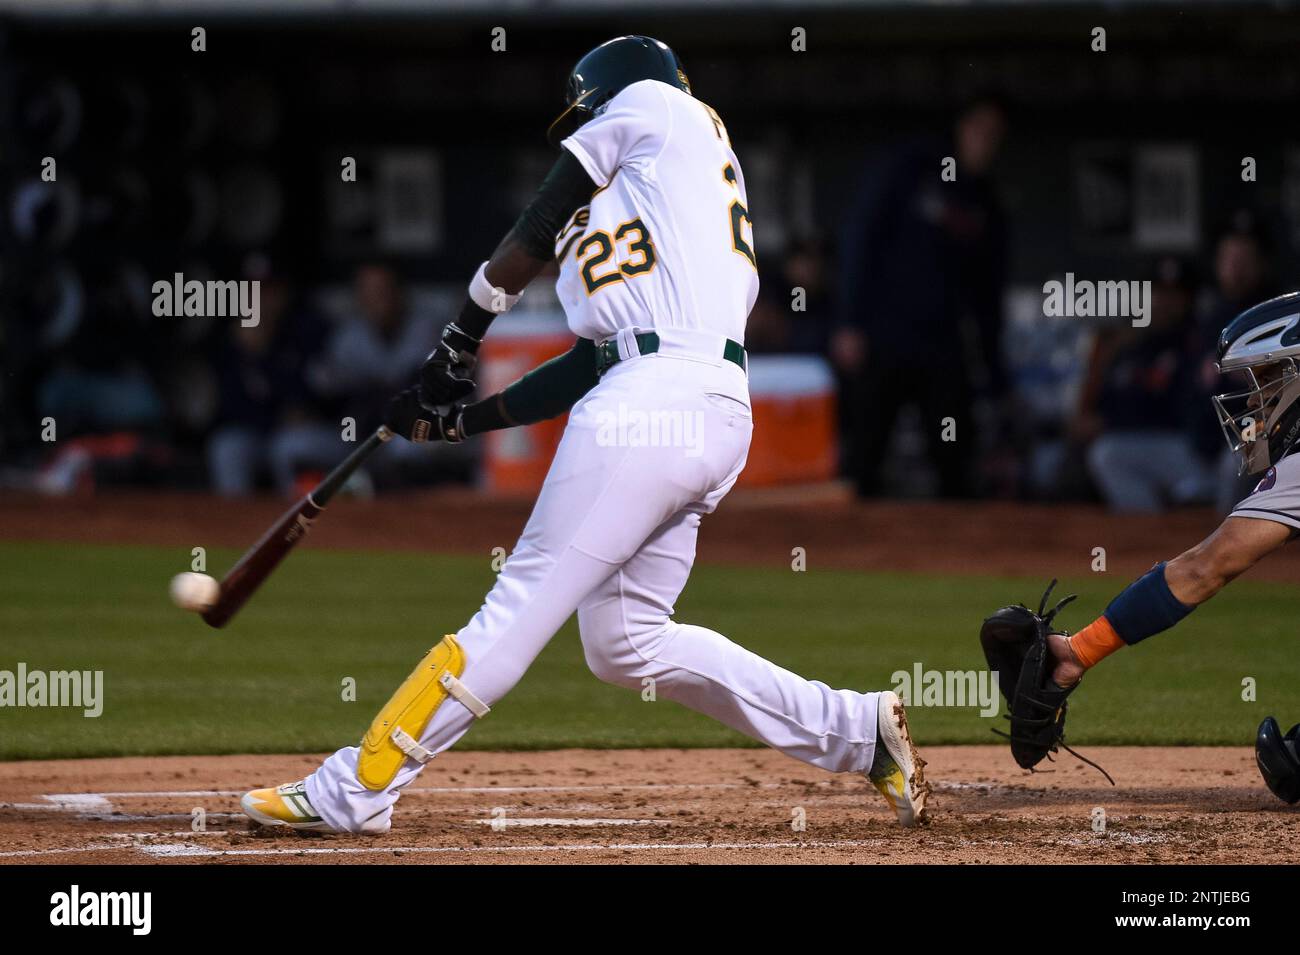 OAKLAND, CA - APRIL 21: Oakland Athletics Infielder Jurickson Profar (23)  walks back to the dugout during the MLB game between the Blue Jays and A's  at O.co Coliseum in Oakland, CA. (